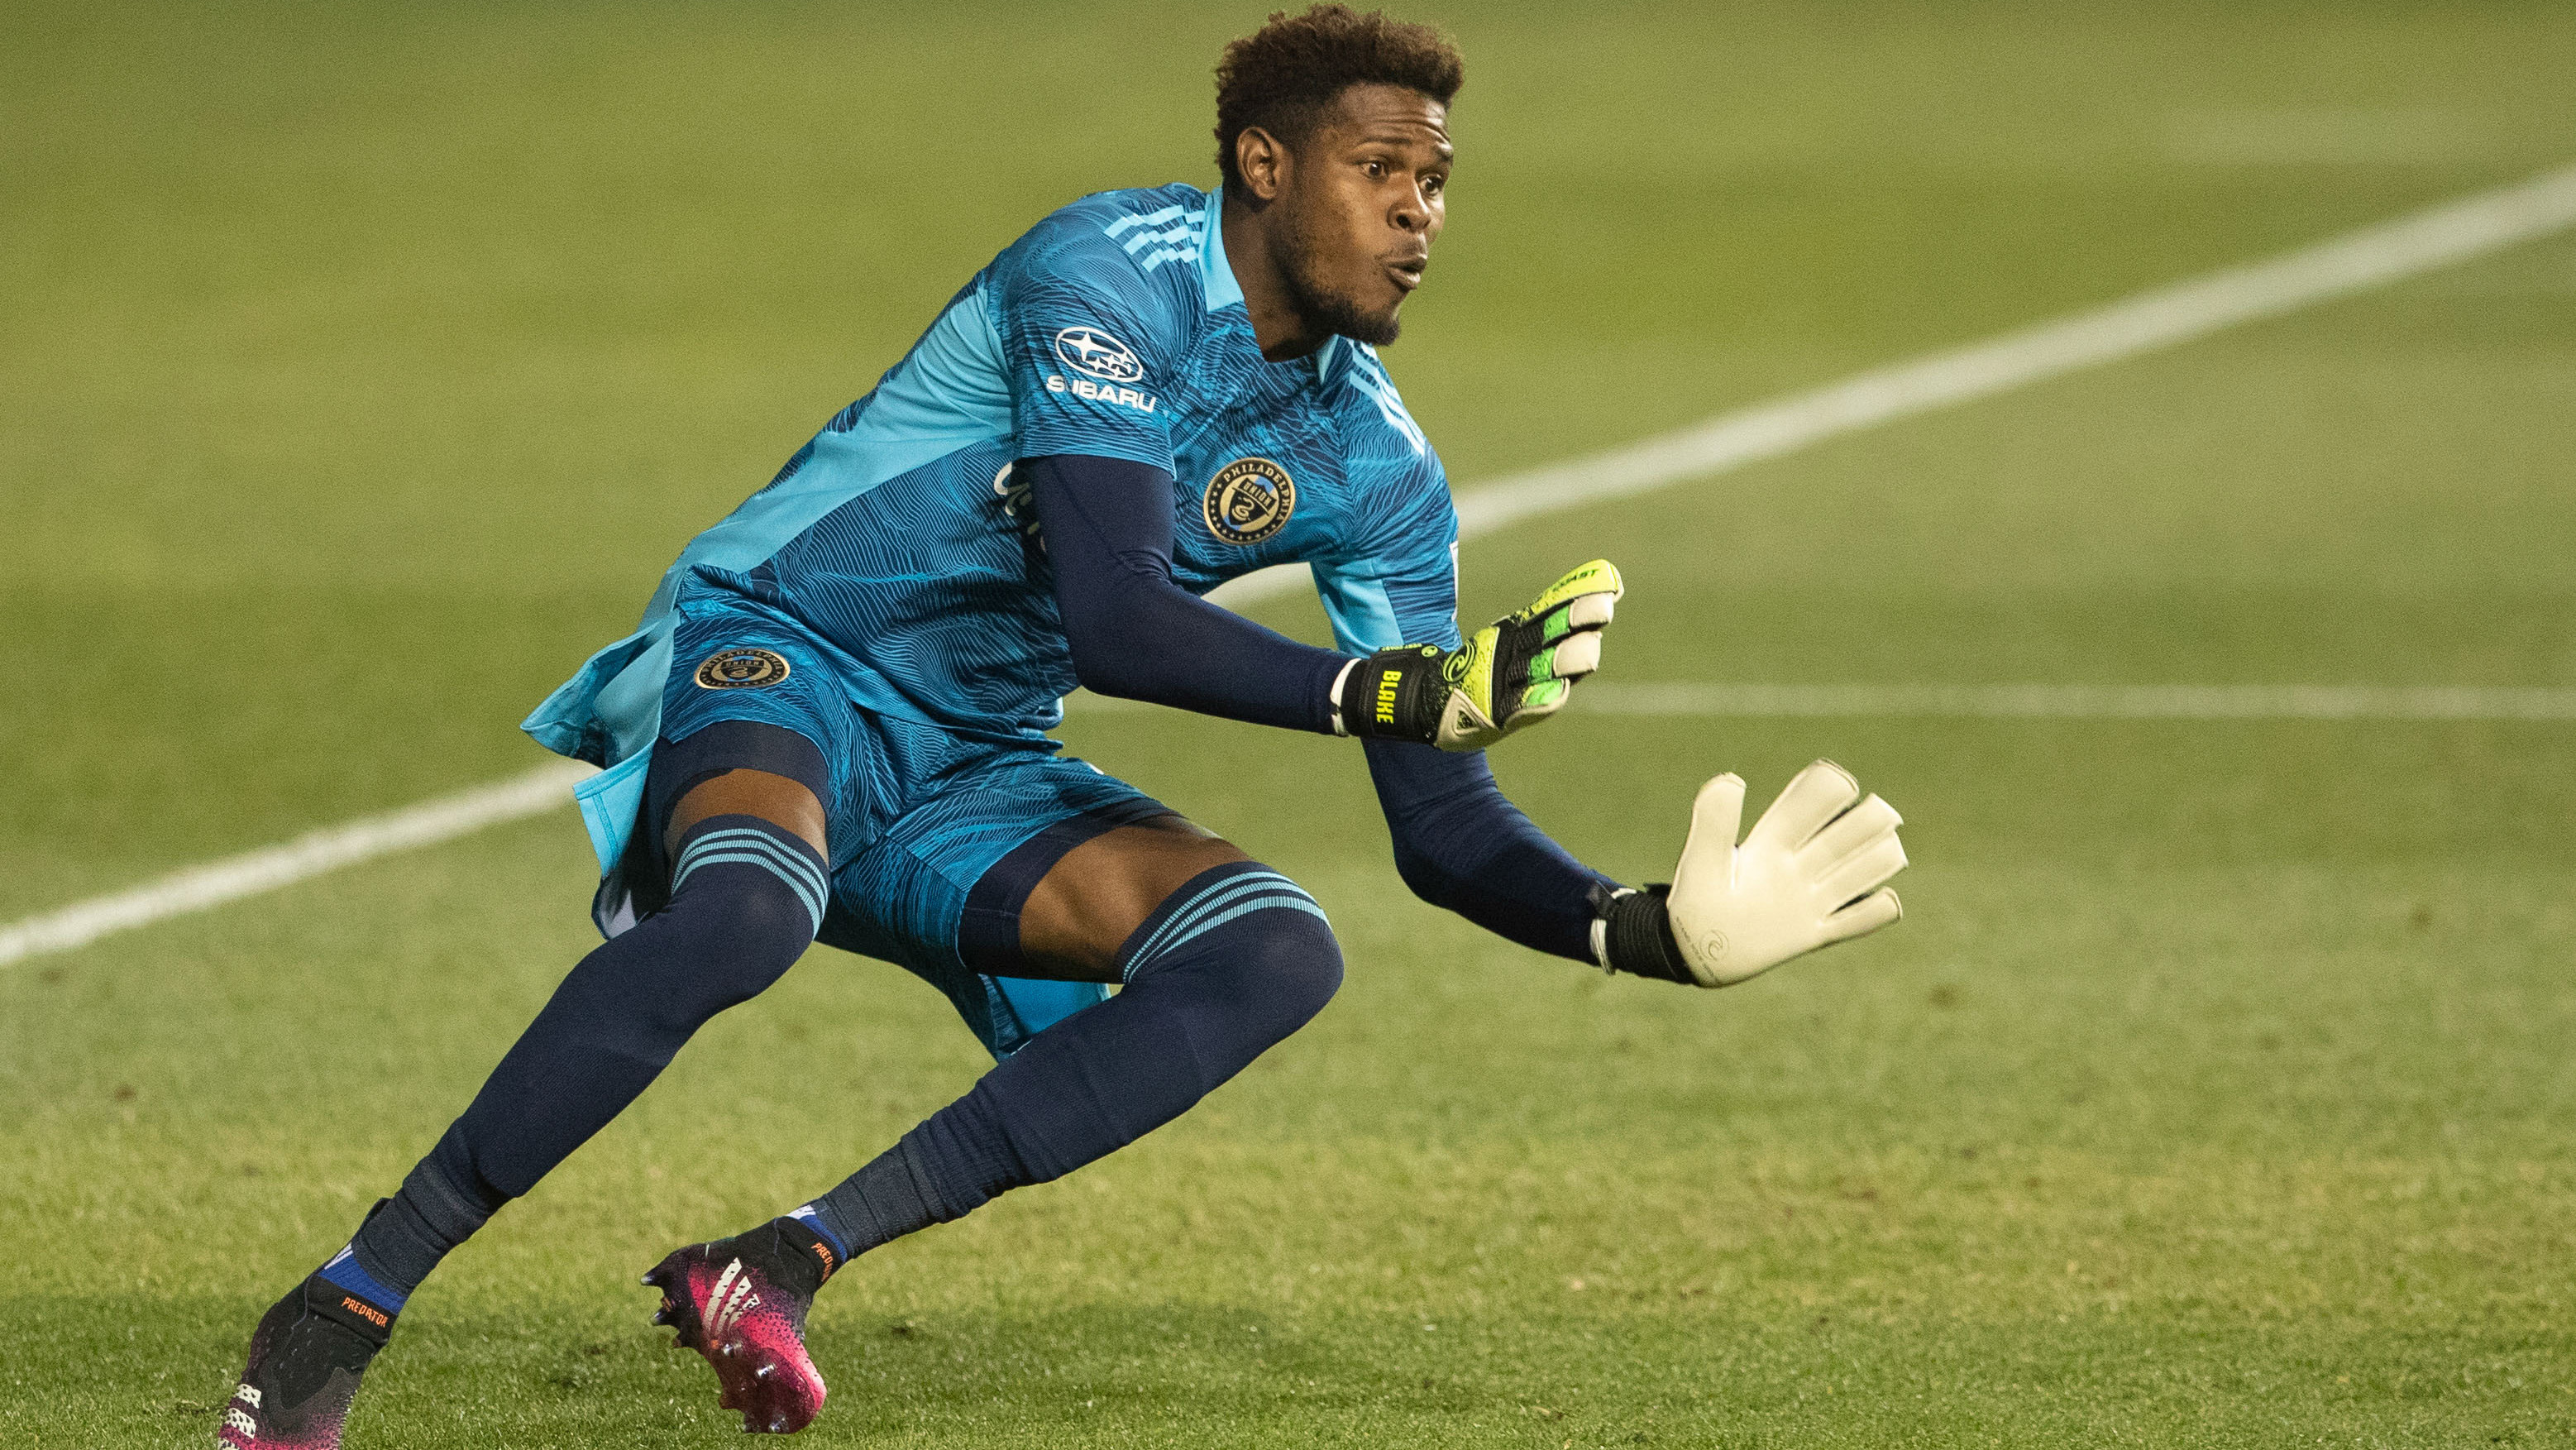 Philadelphia Union sign goalkeeper Andre Blake to multi-year contract extension | MLSSoccer.com